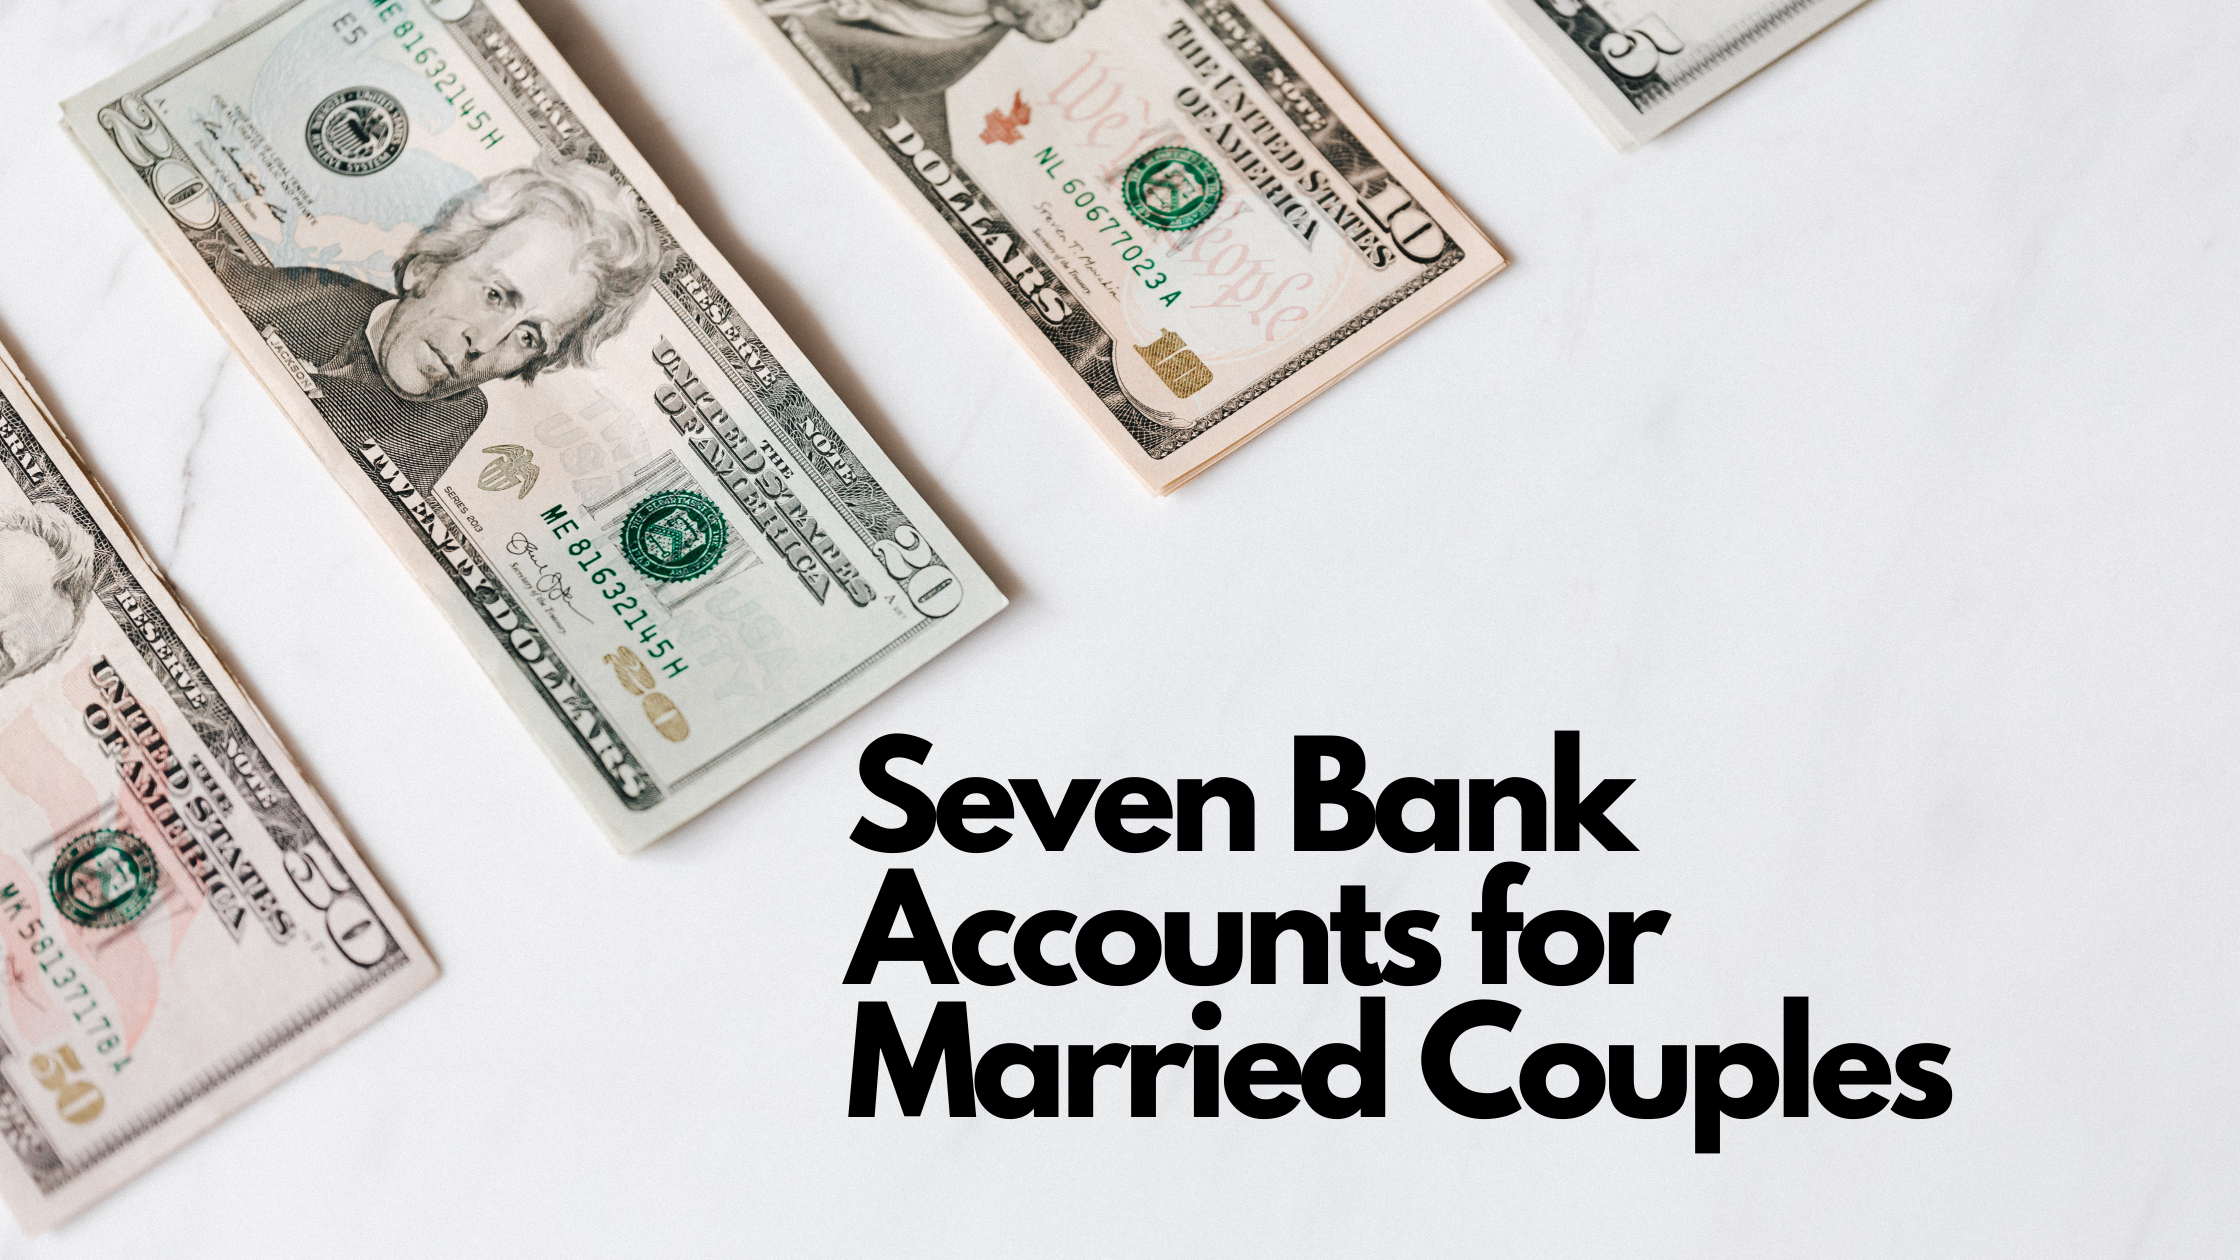 Seven Bank Accounts for Married Couples